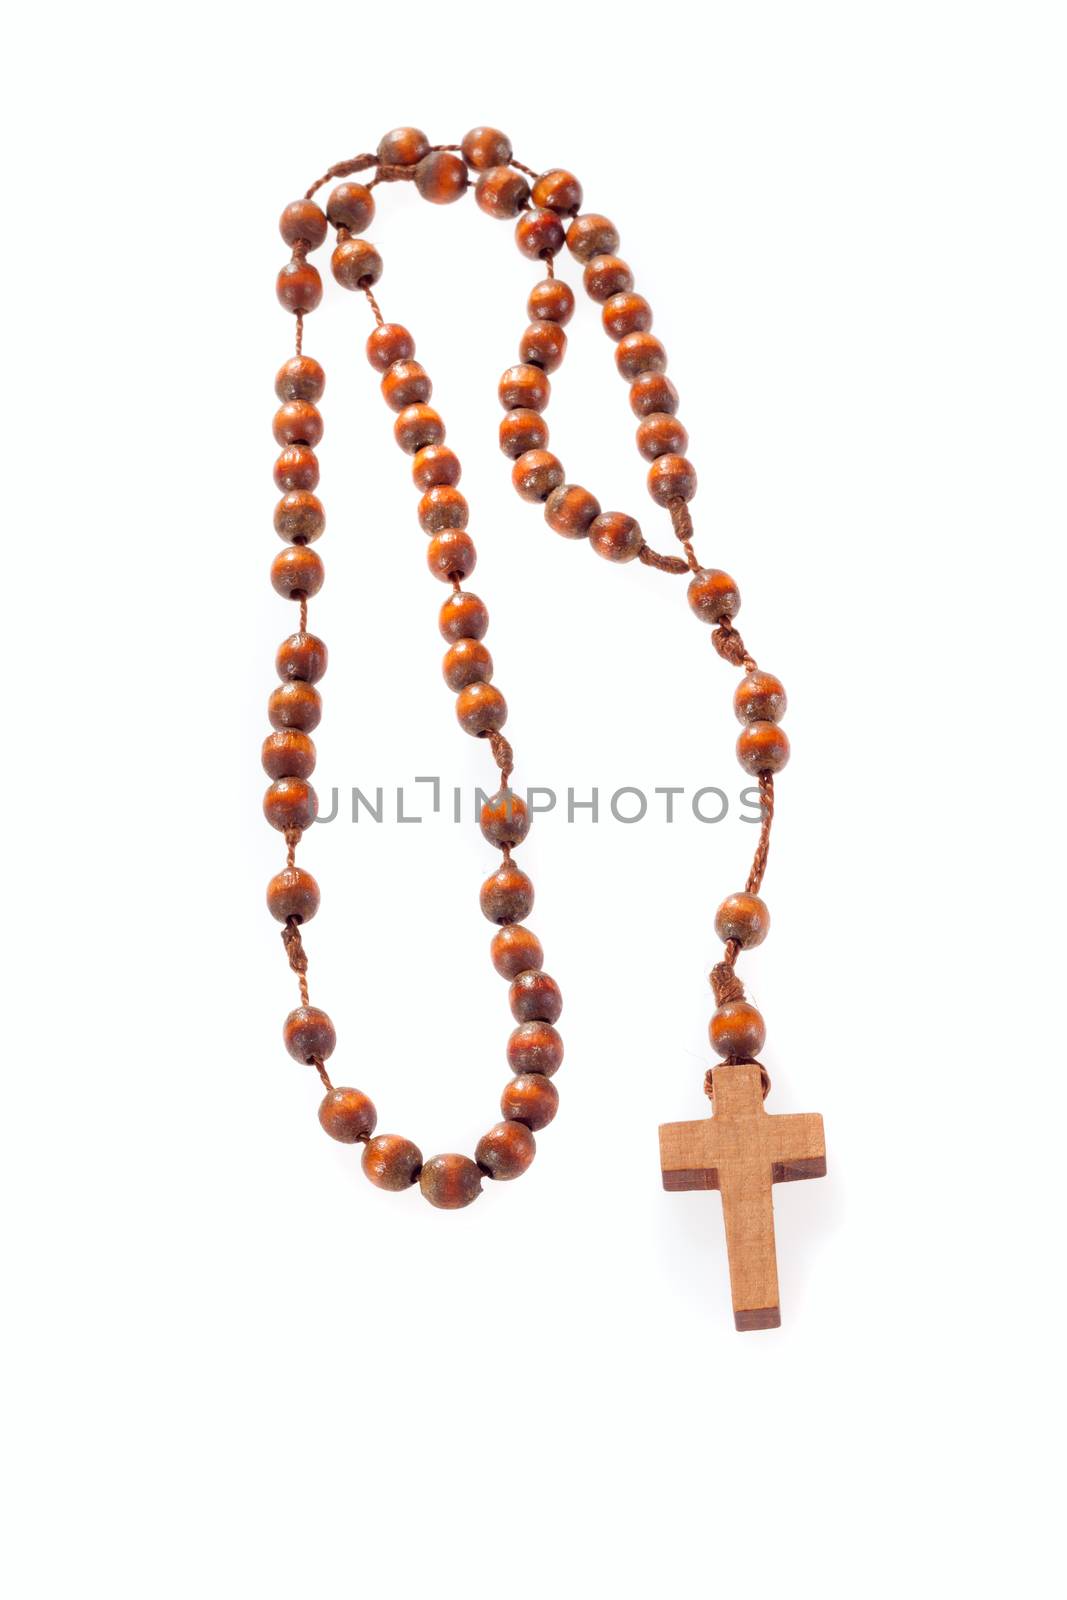 Wooden rosary beads by aguirre_mar